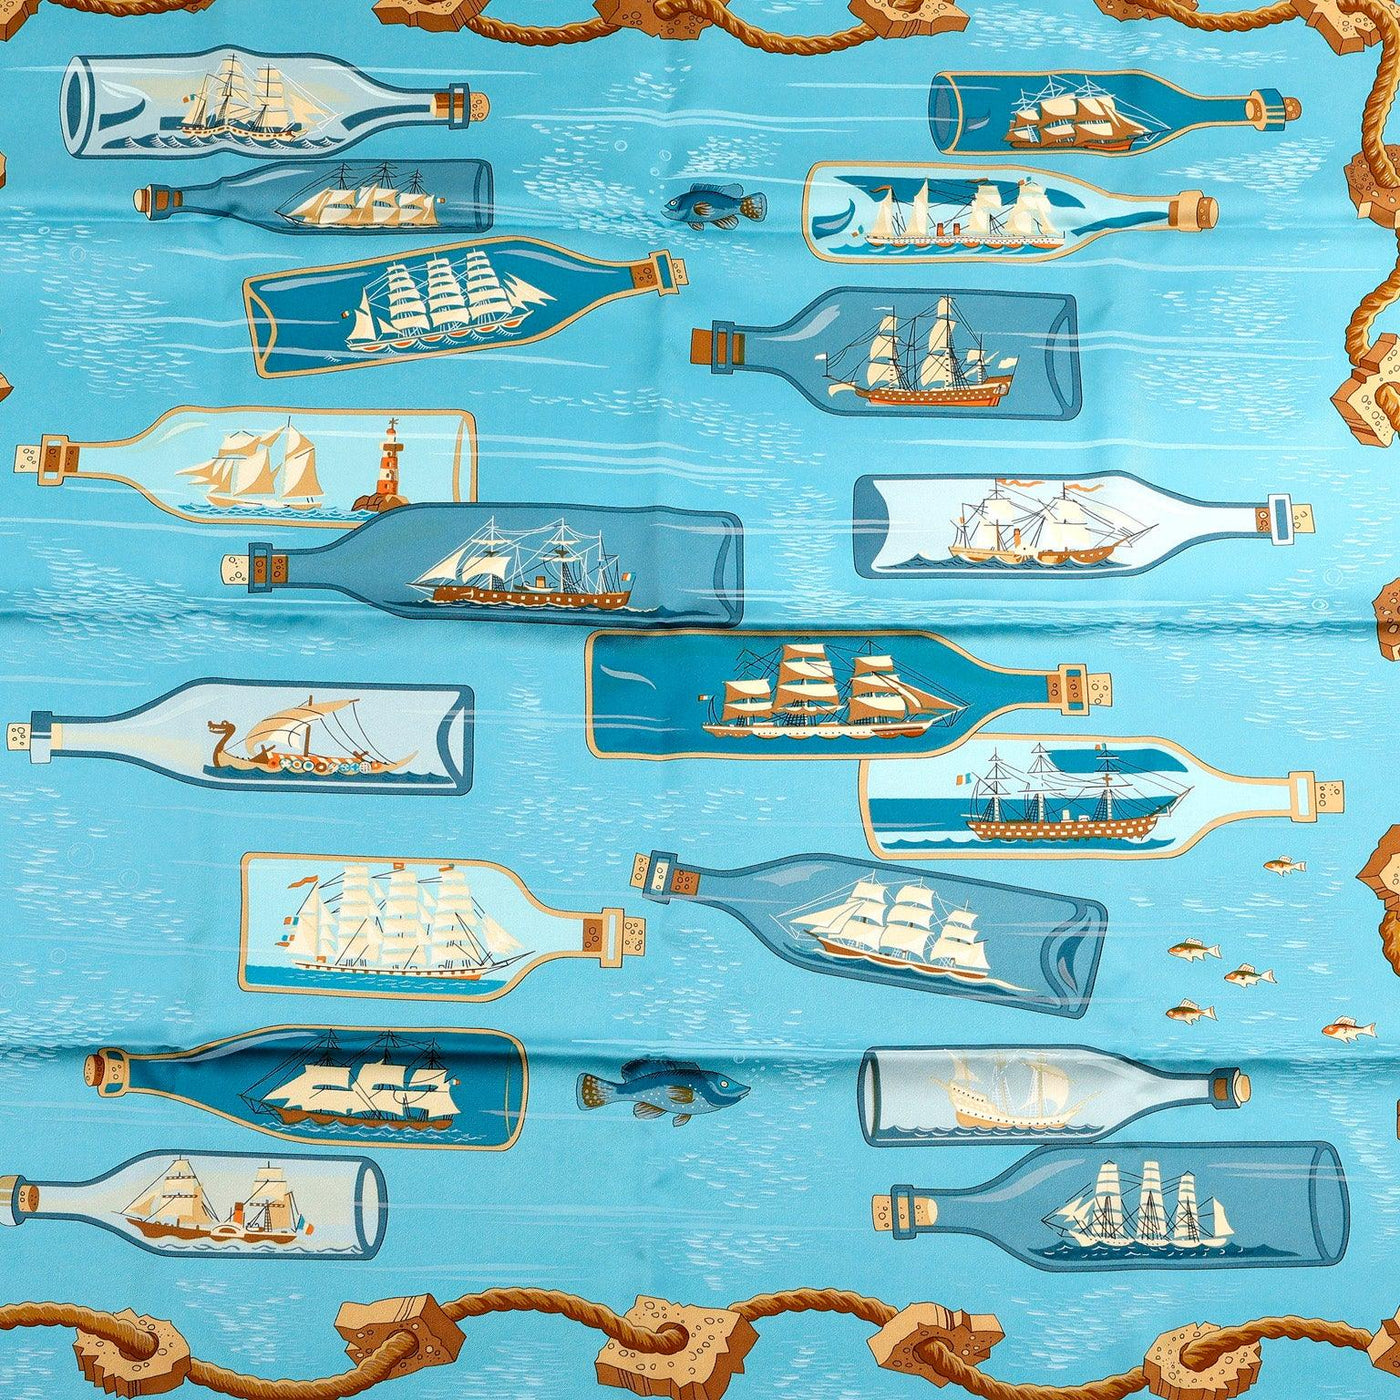 Hermès Blue Ships in a Bottle Silk Scarf - Only Authentics